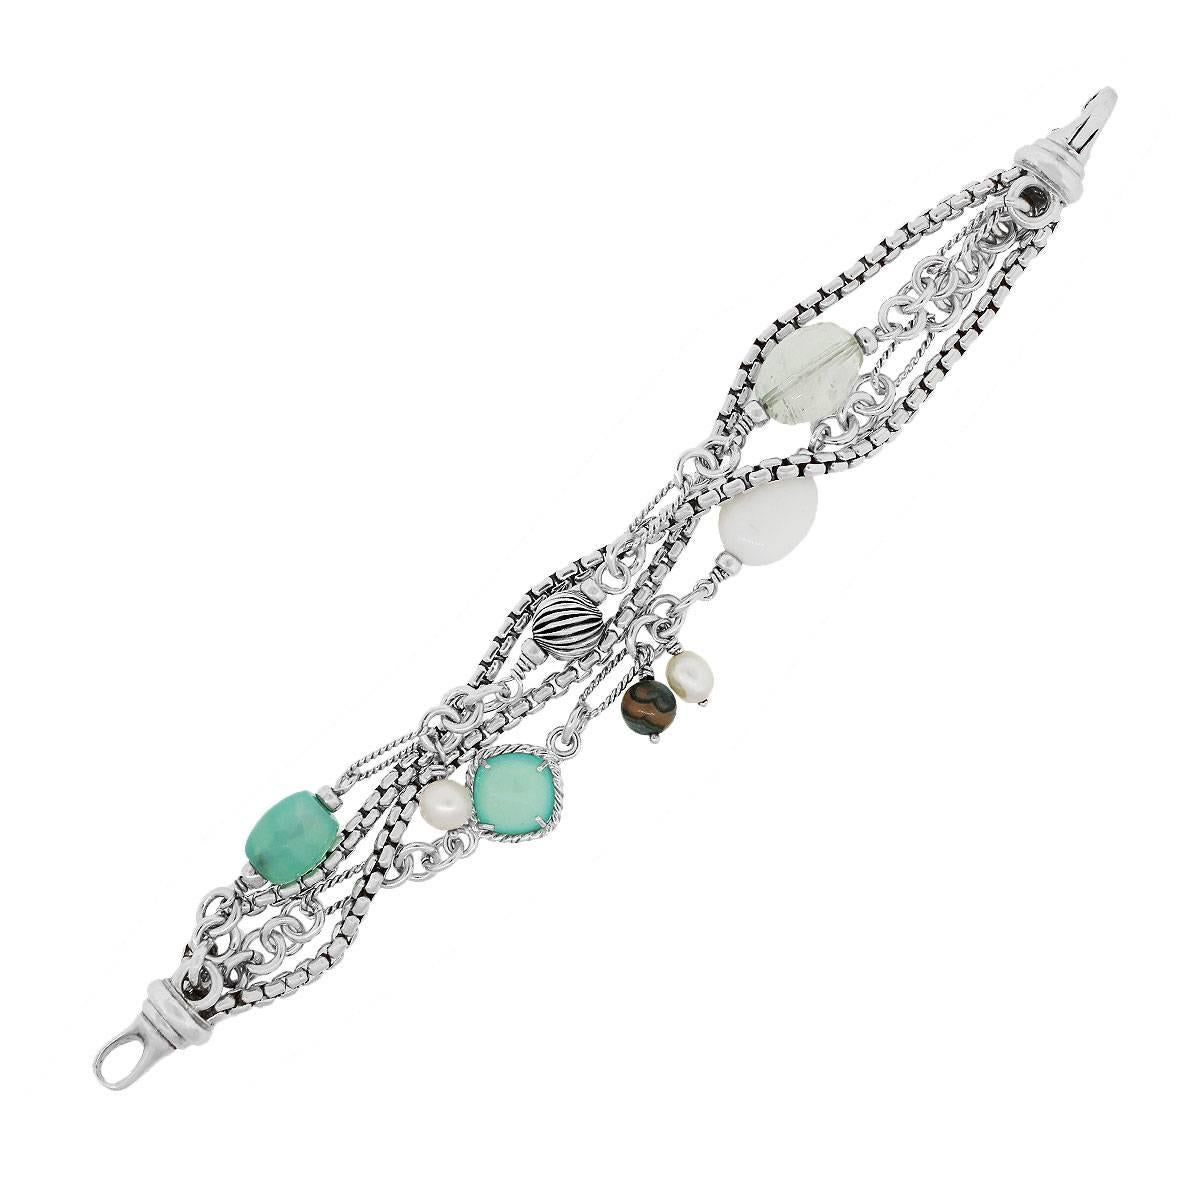 Material: 18k White Gold and Sterling Silver
Gemstone Details: Chalcedony and Pearls
Clasp: Crab Claw Clasp
Measurements: 8″
Total Weight: 57.9g (37.2dwt)
SKU: G7323